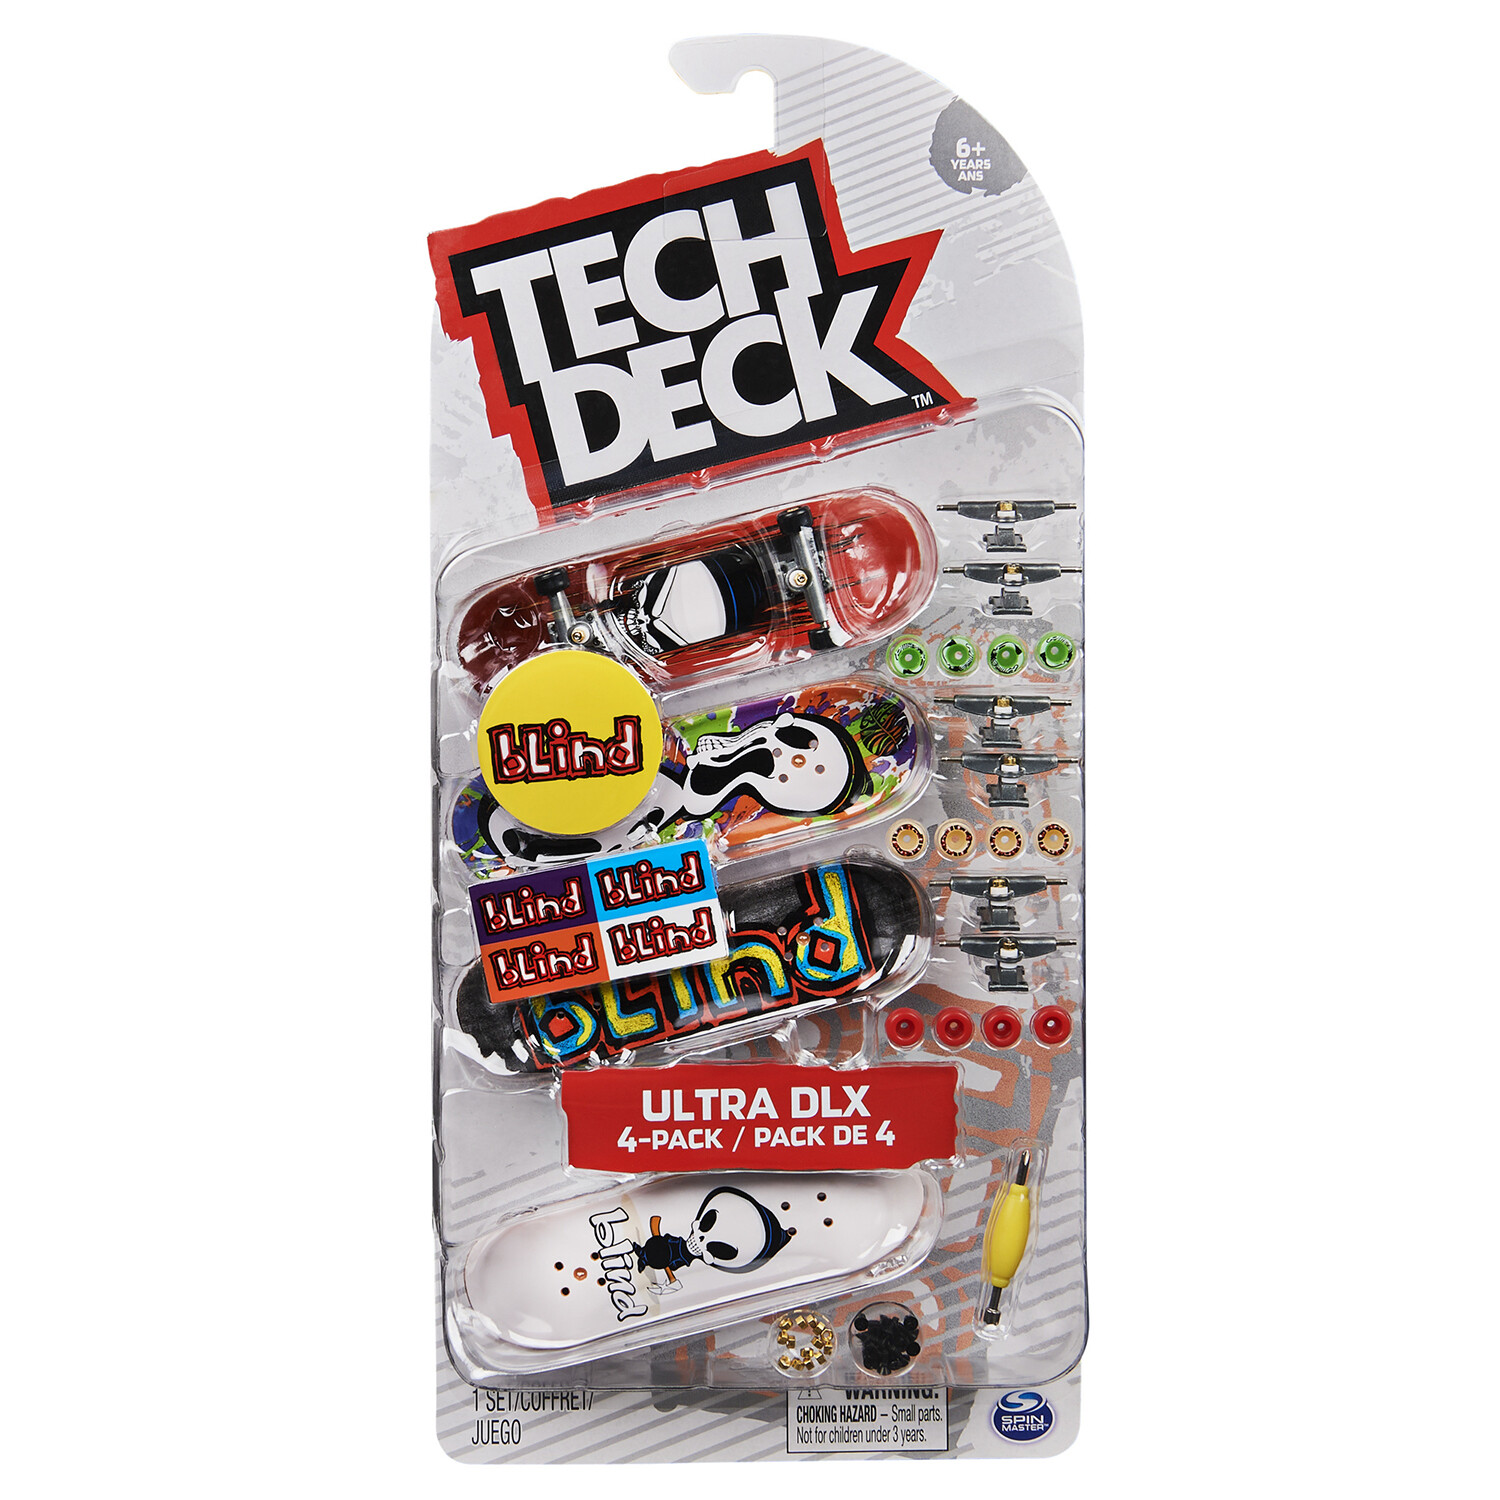 Single Tech Deck Ultra DLX Skateboards Figures 4 Pack in Assorted styles Image 4